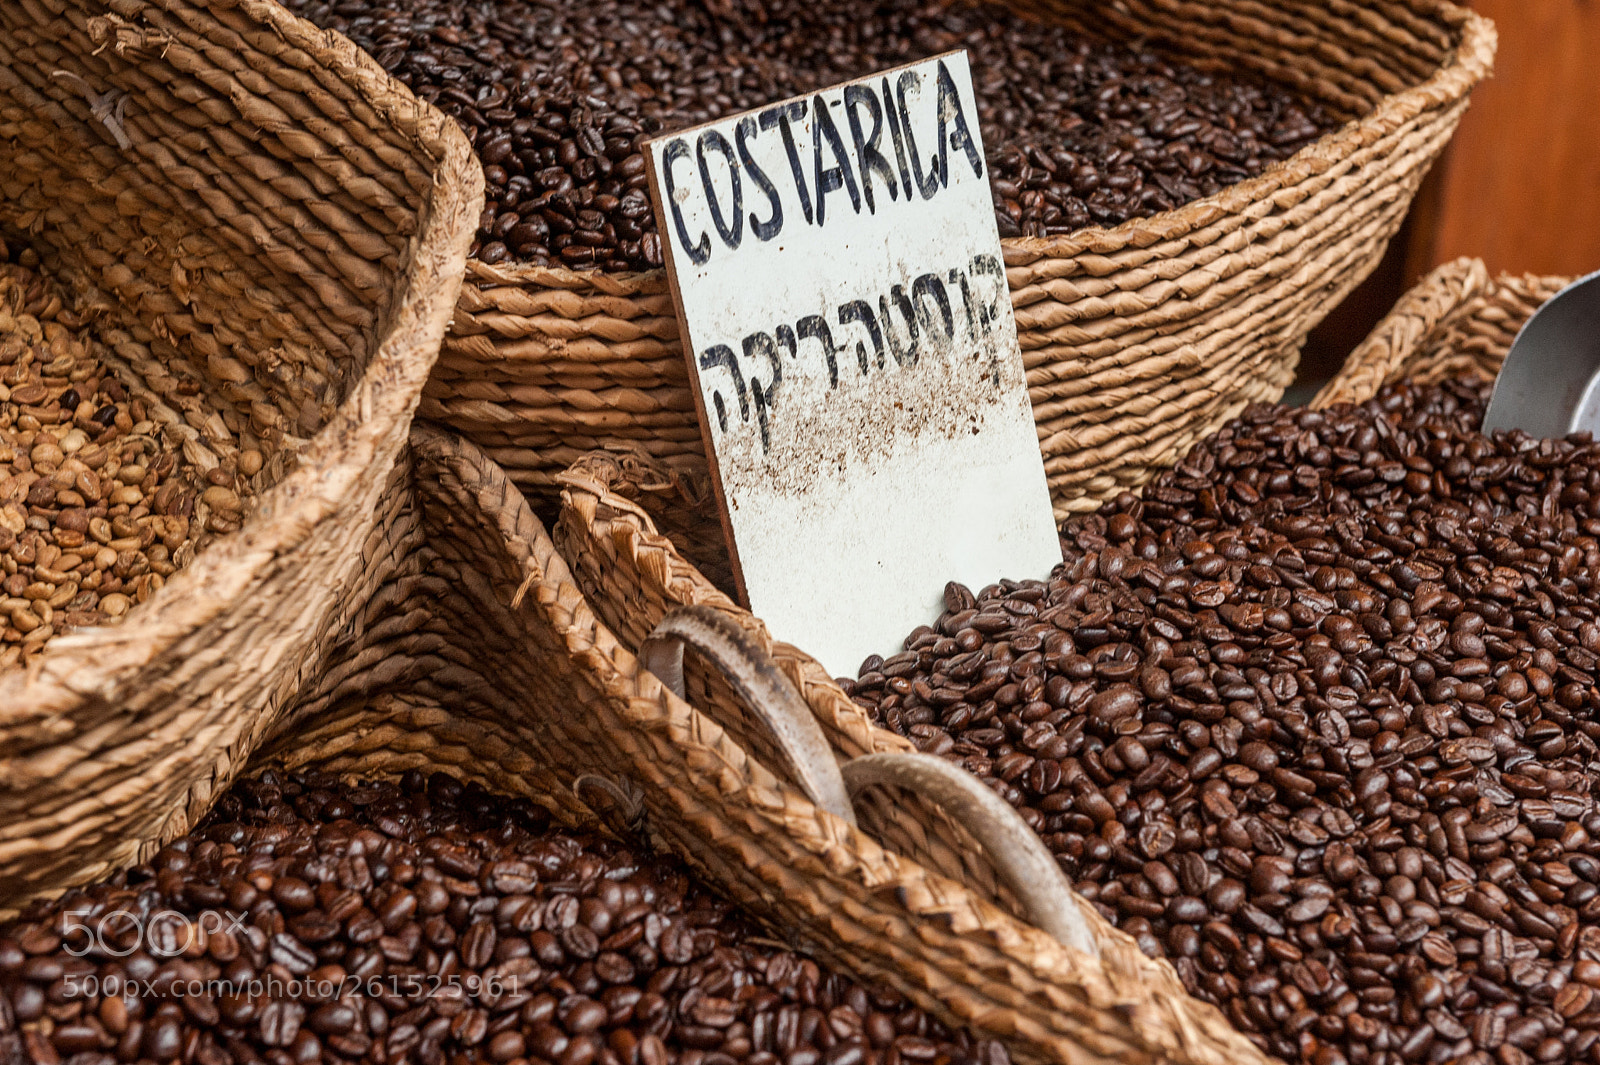 Nikon D700 sample photo. Coffee beans sold at photography